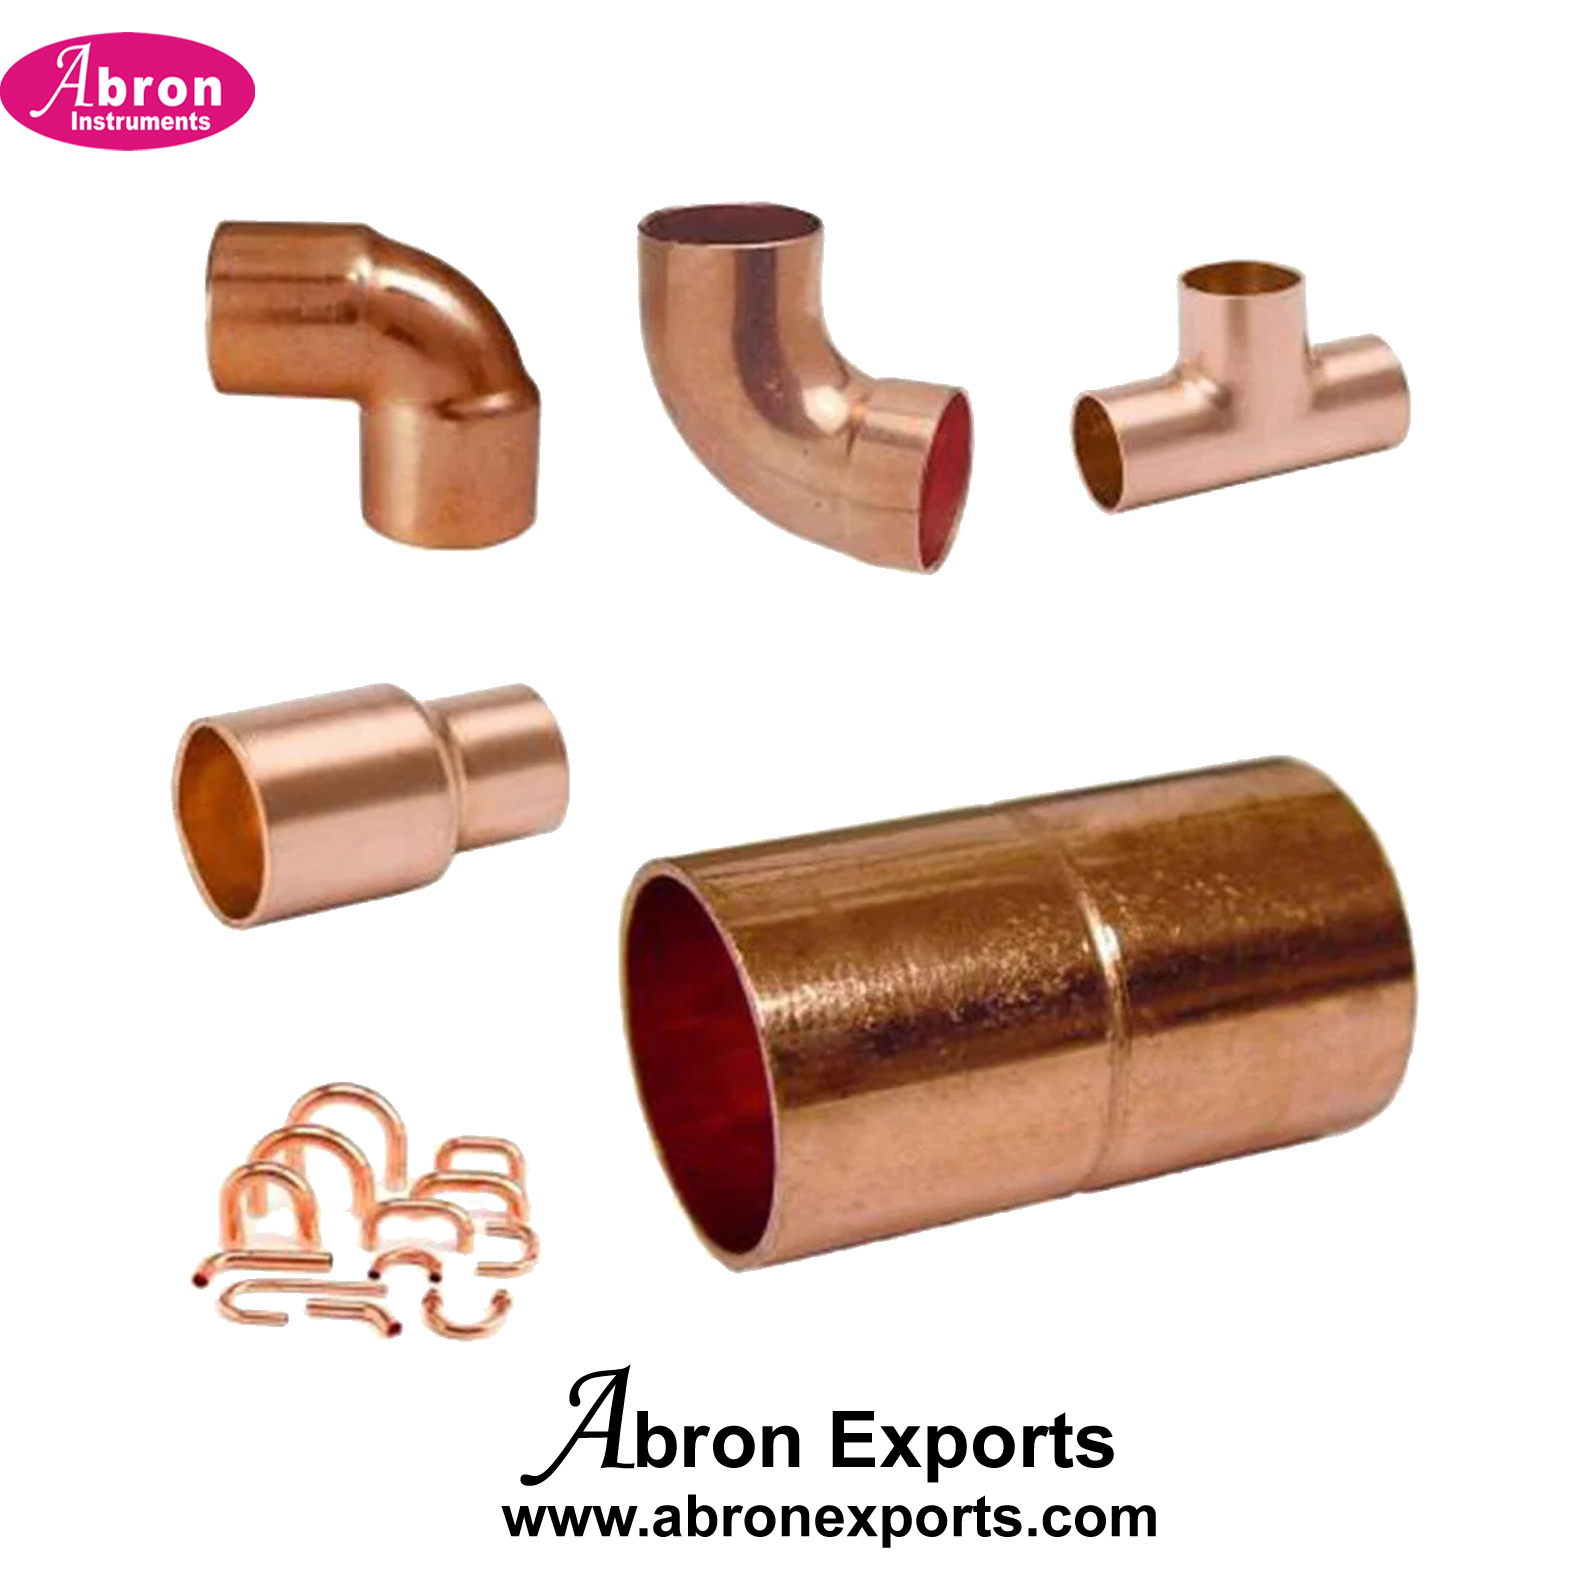 Medical gas Pipe Line spare copper Elboo Tee Cupler Reducer set 15mm or 22mm copper Pack of 100 each Abron ABM-1121PK15 